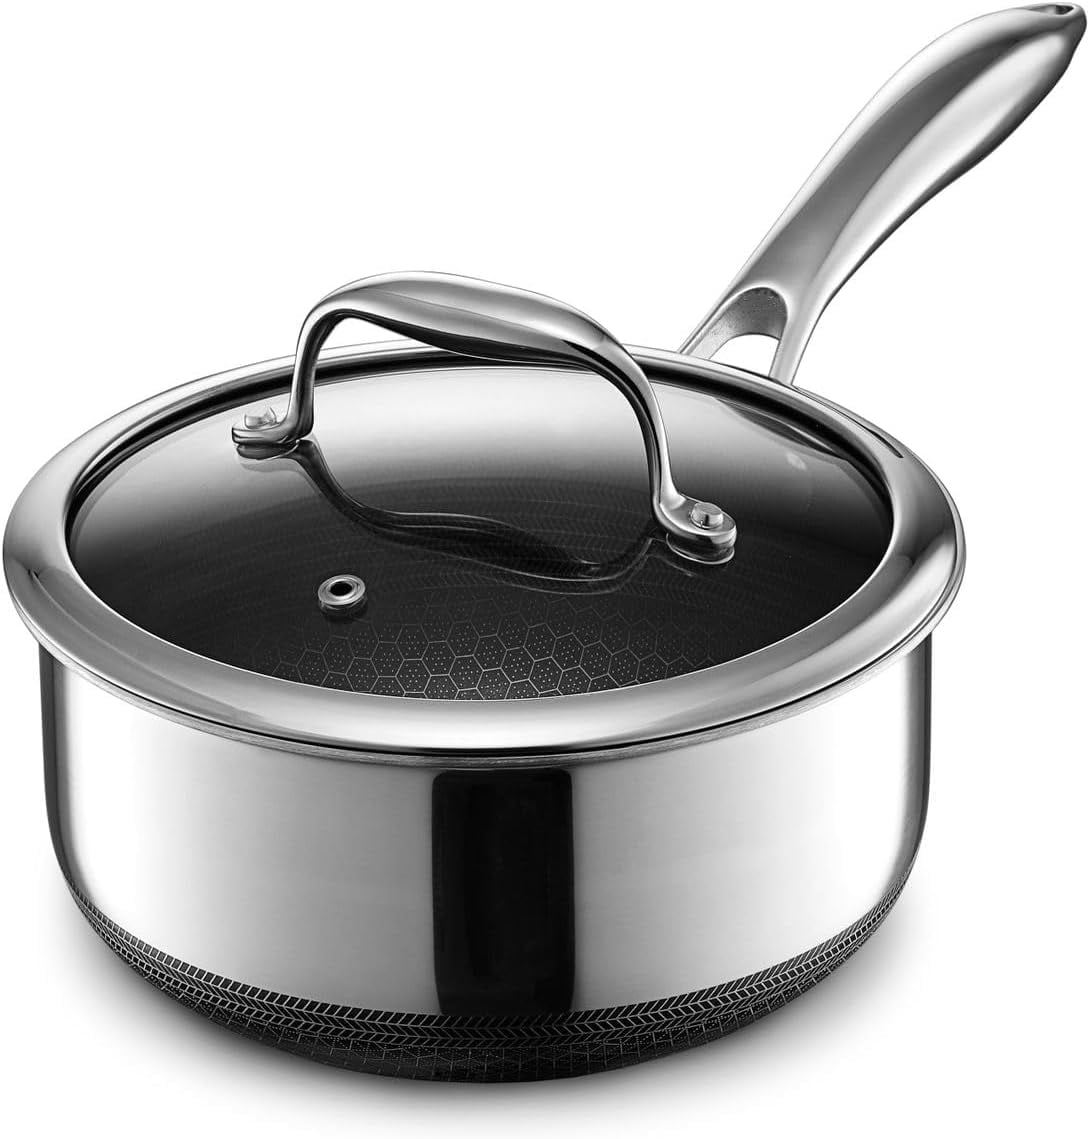 HexClad 2 Quart Hybrid Stainless Steel Pot Saucepan with Glass Lid, Nonstick